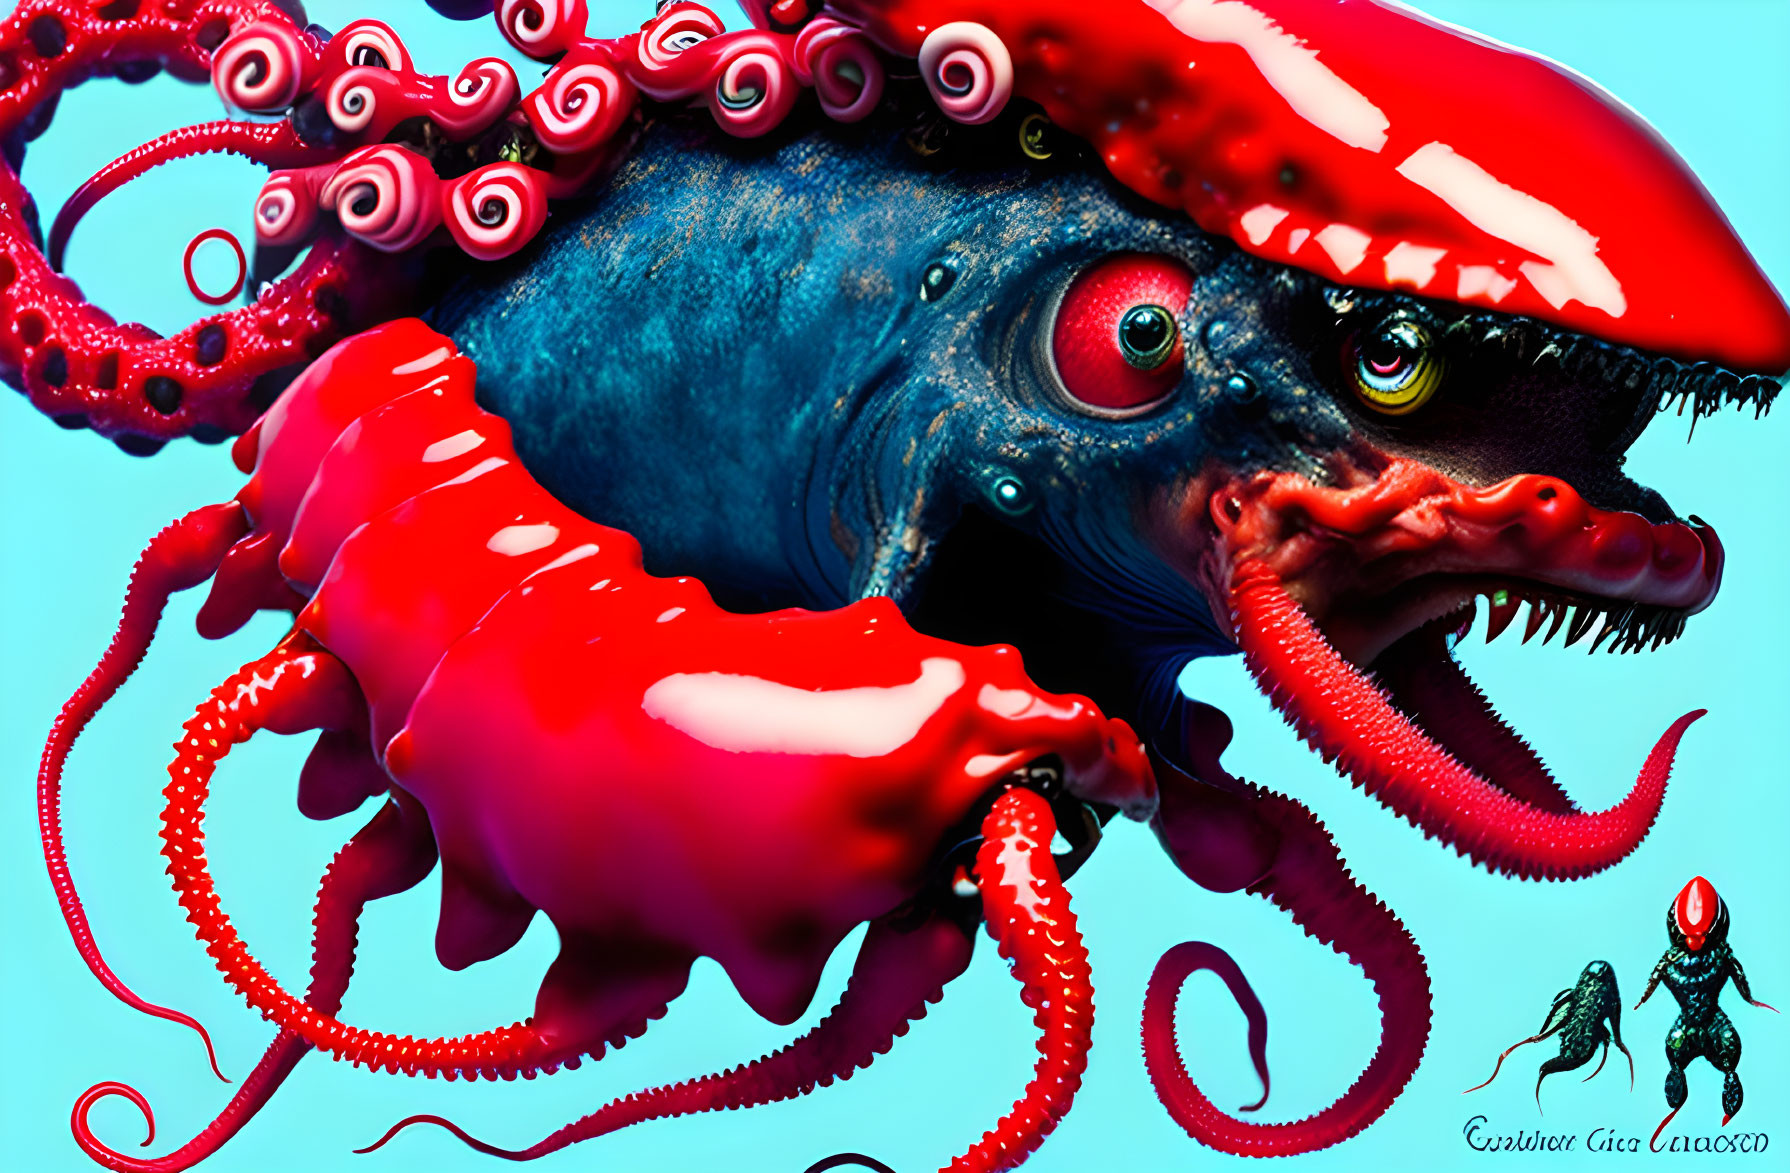 Surreal creature with octopus tentacles and crab body on blue background